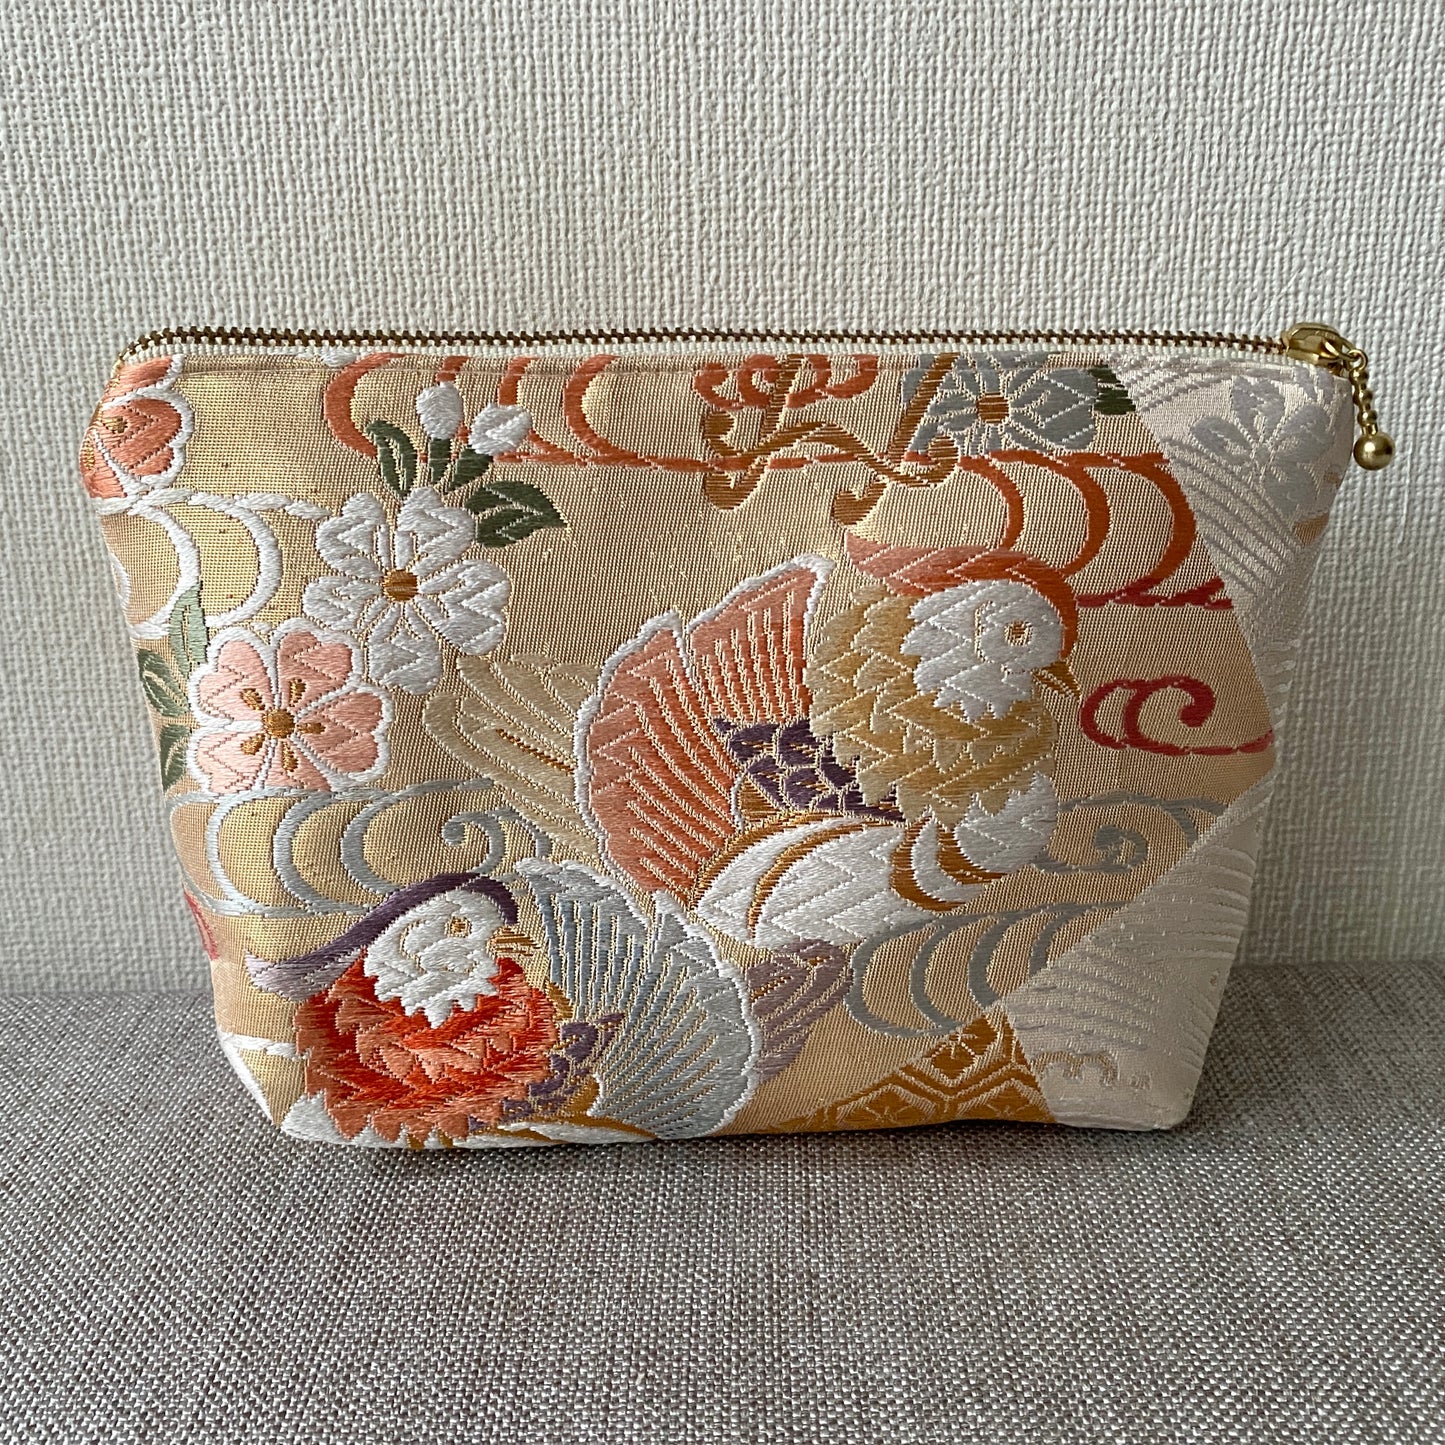 Small Silk Obi pouch, Handcrafted, Upcycled, #3003